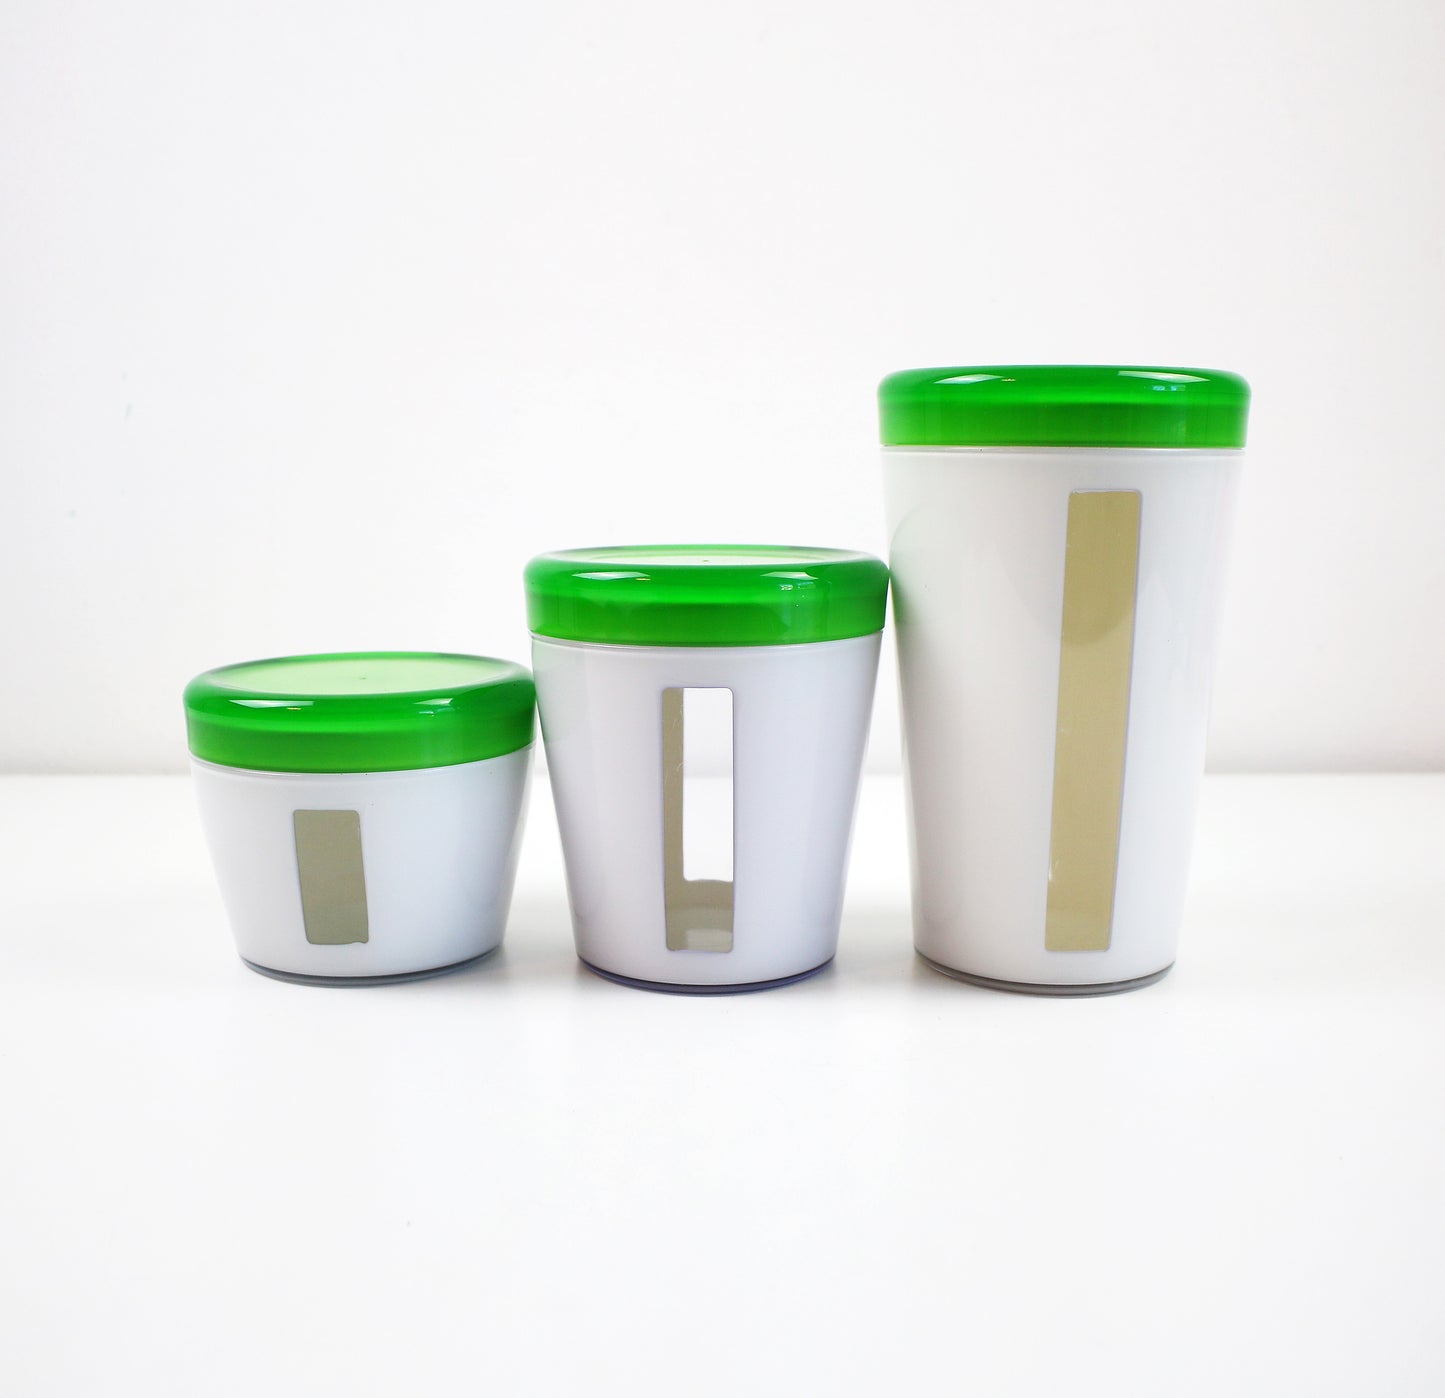 Preloved Italian acrylic canister set by Omada in green and white